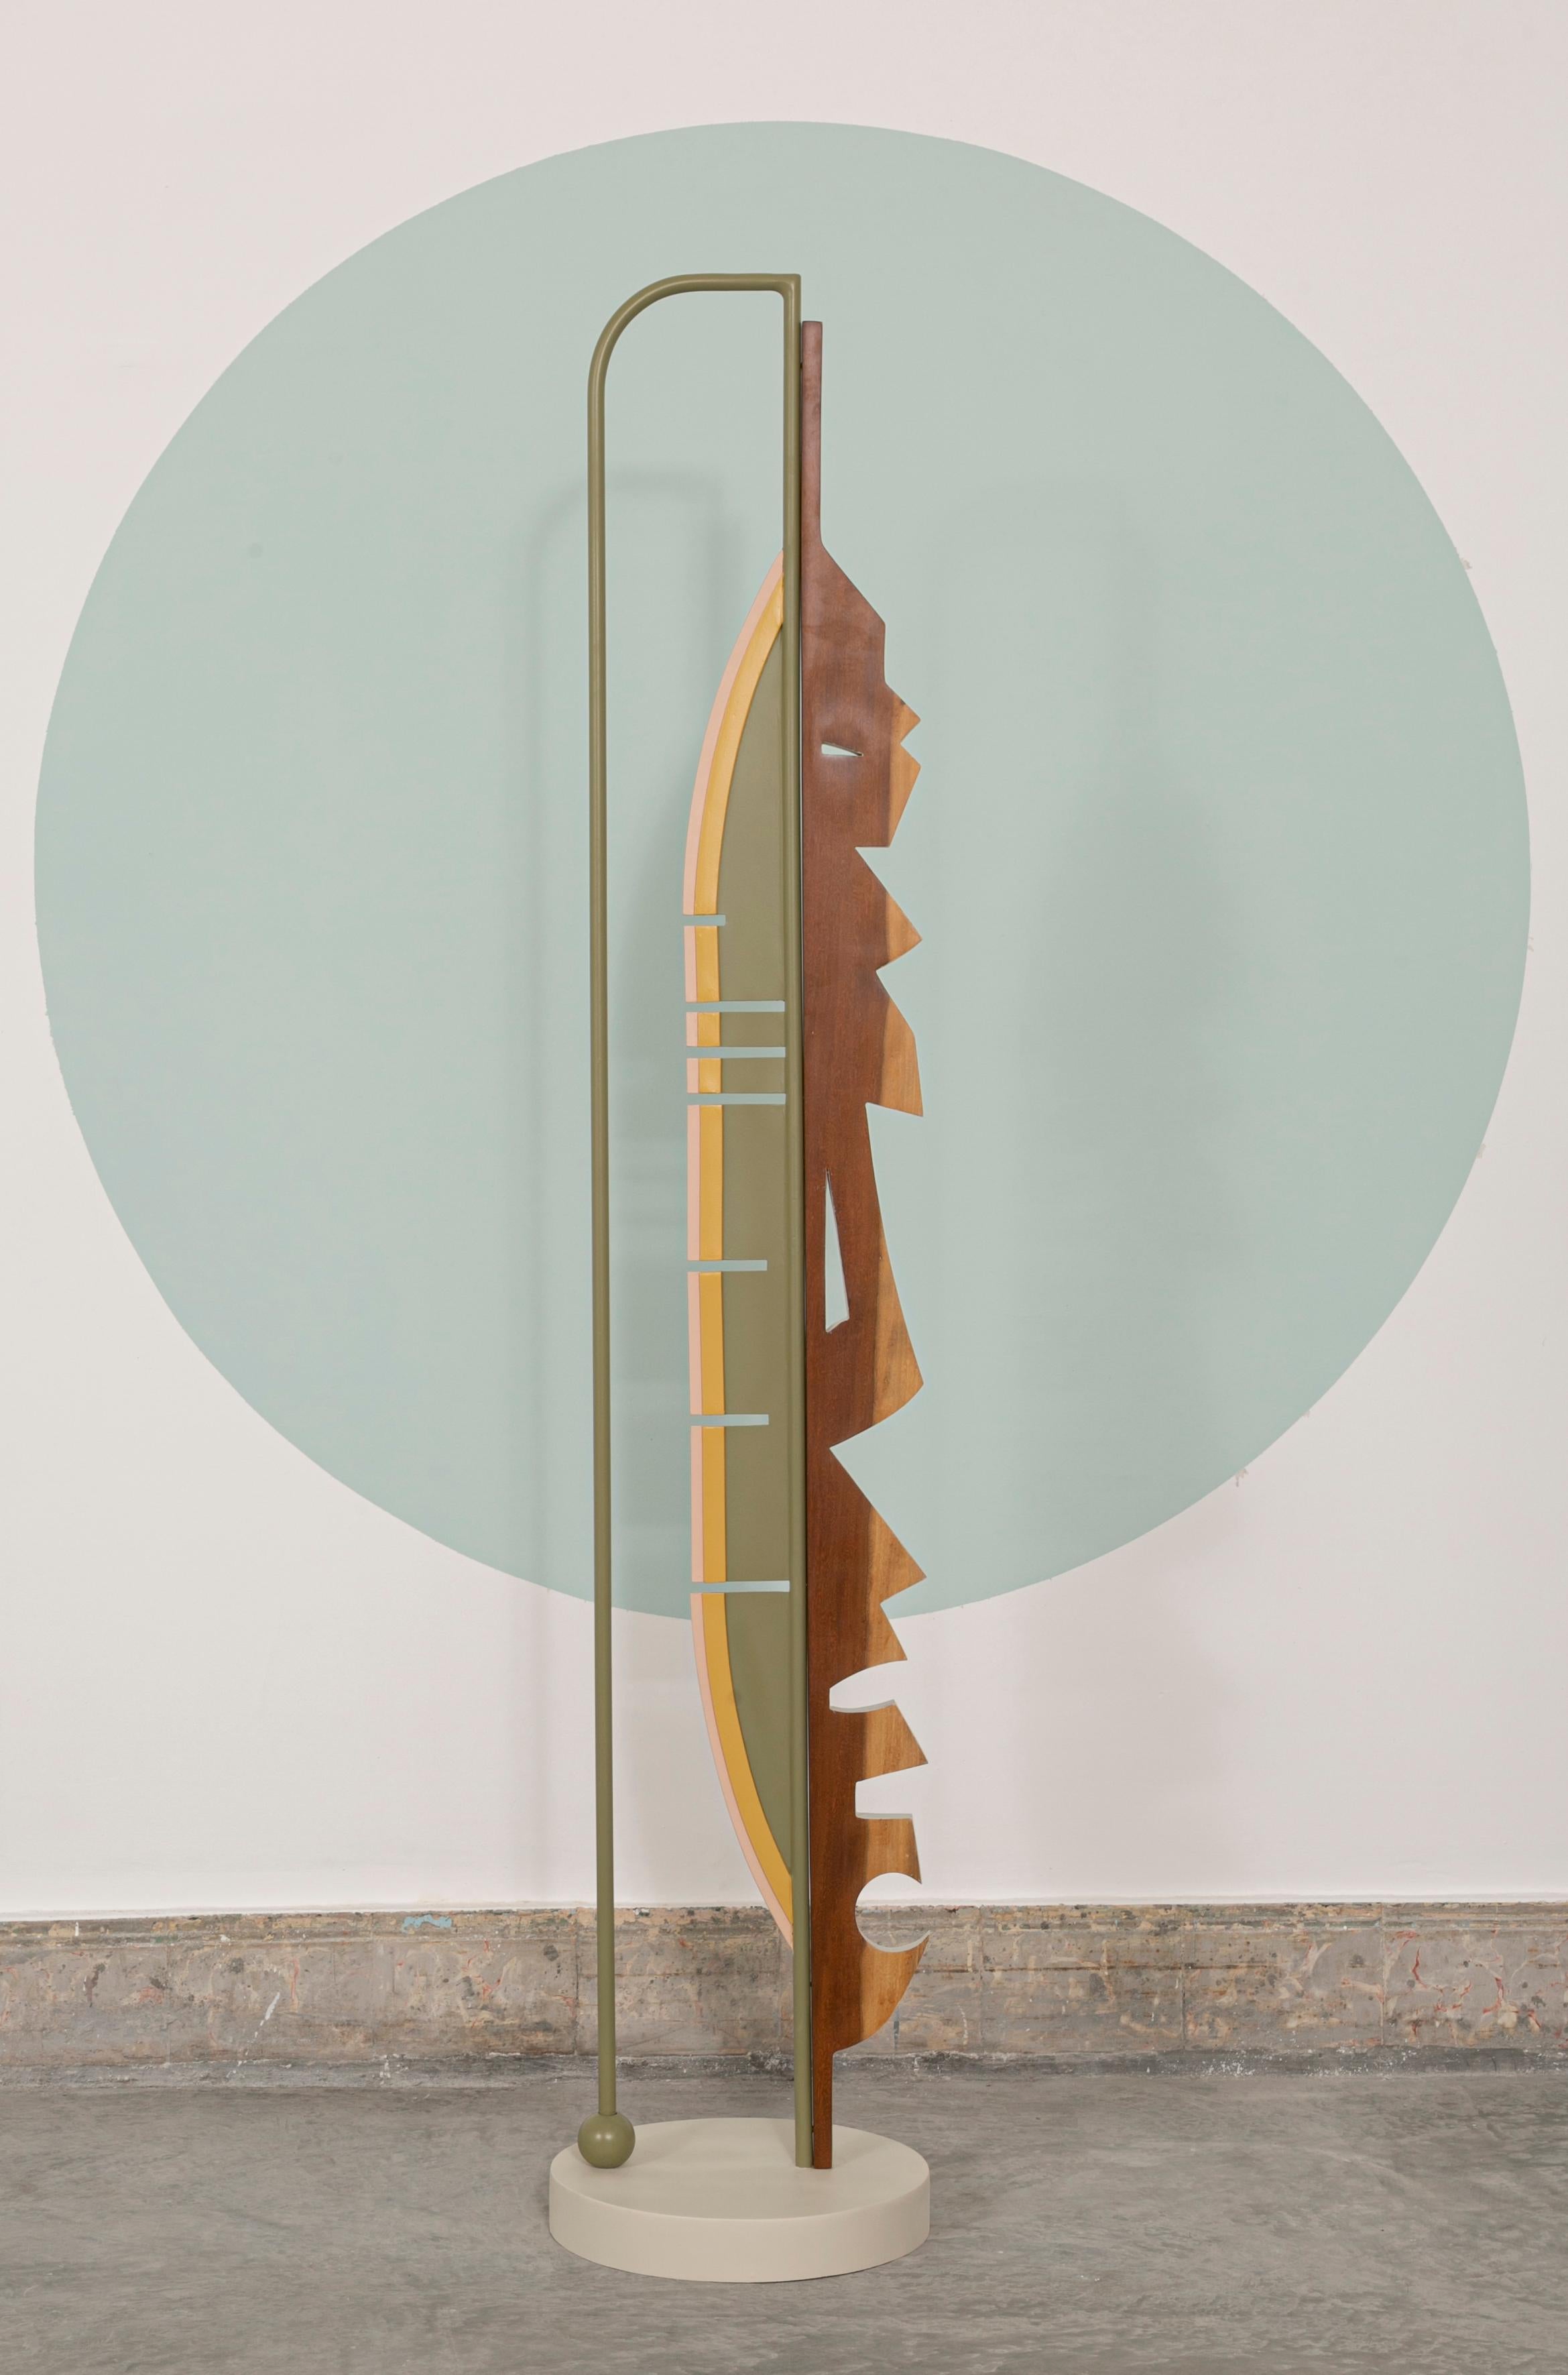 Cycle of Life TOTEM by Sofia Alvarado
Dimensions: D30x H175 cm
Materials: Guayacán wood / lacquered solid metal.
One of a kind.

FI is an ornamental artist who embodies the creative Revelation of the sensitivity of the innate being, with